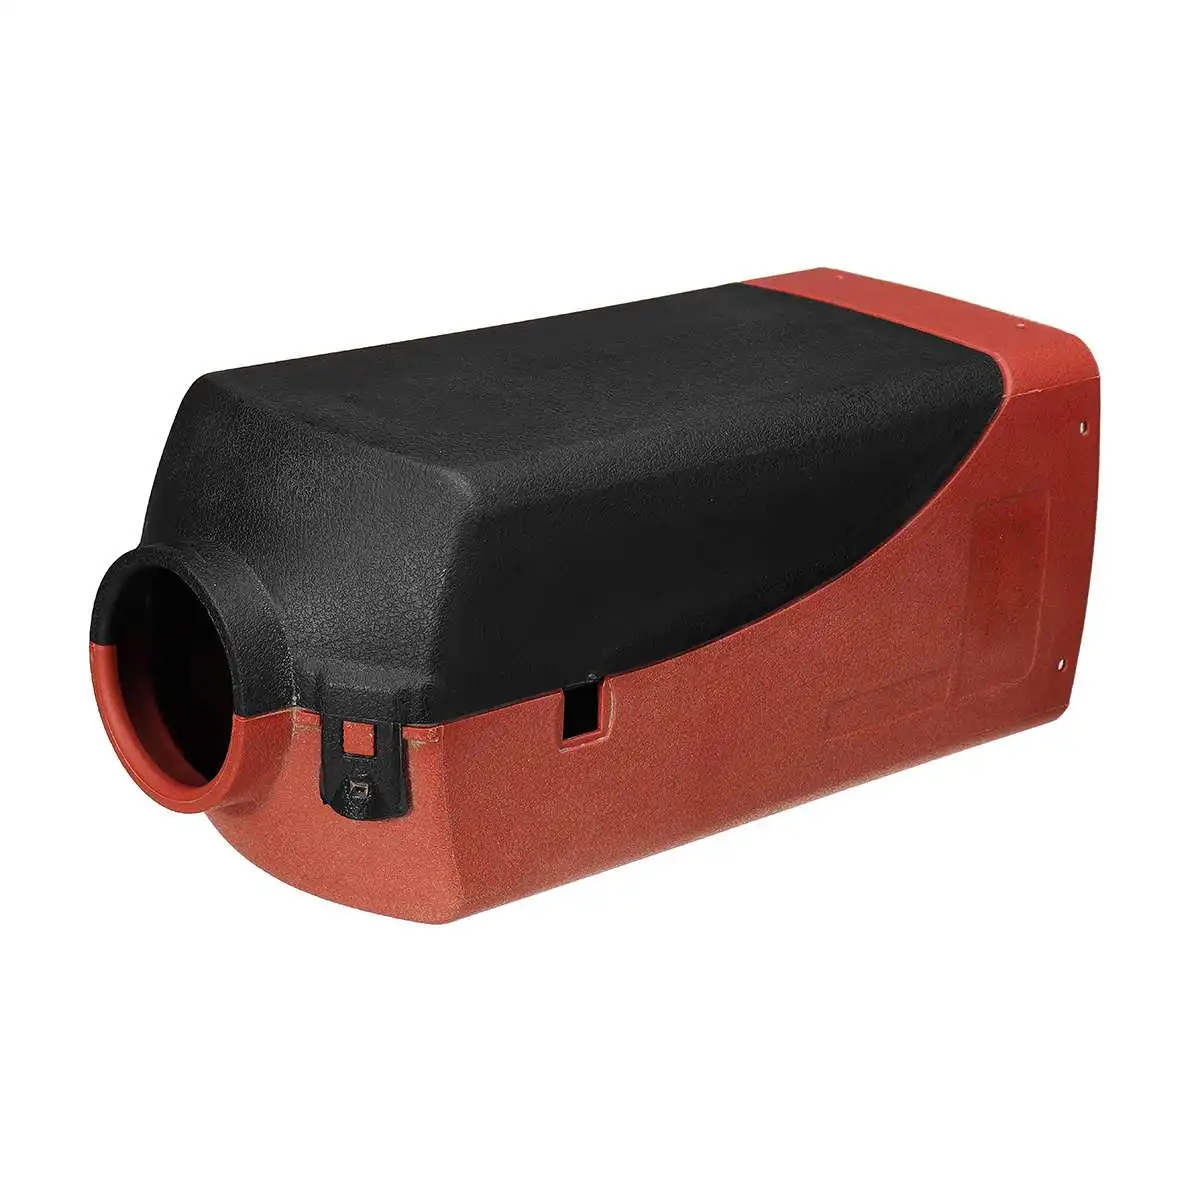 Autoleader Plastic Black Red Diesel Air Heater Case Shell Stainless Steel Car Air Diesel Heater Silencer For Trucks Boats Bus RV